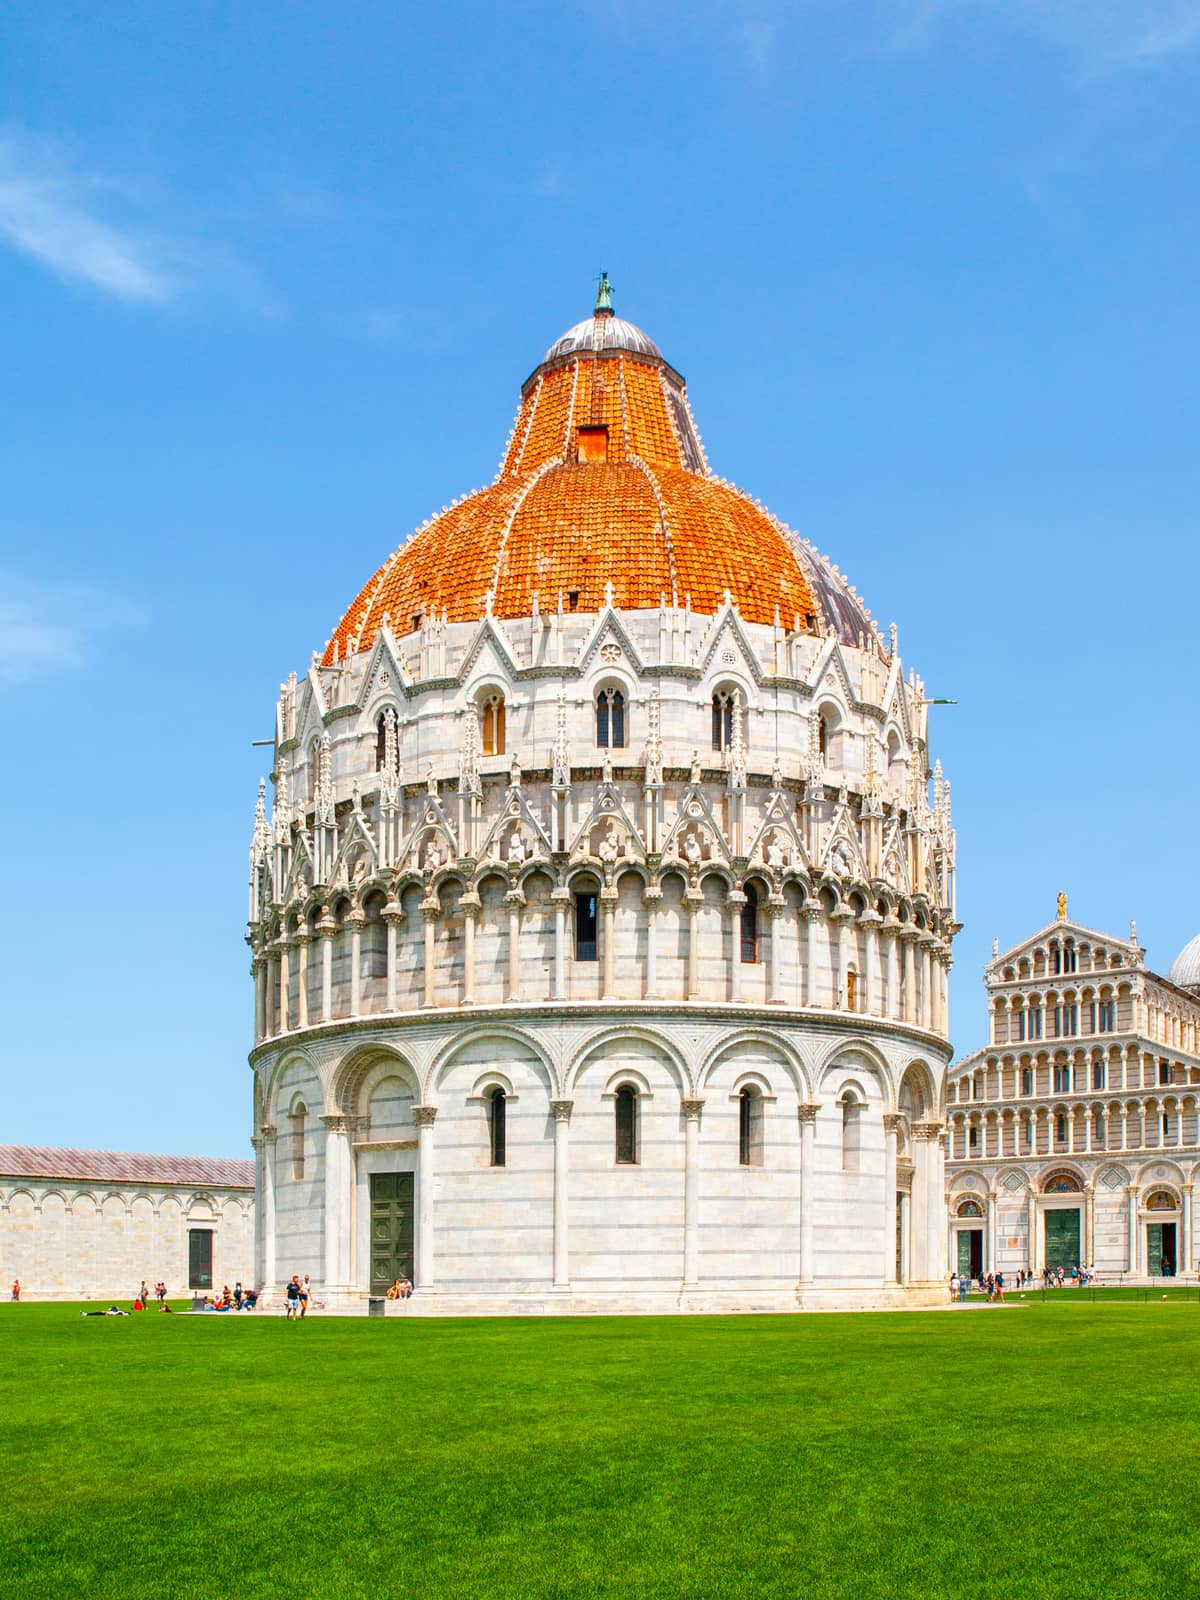 Pisa Baptistery of St. John, Battistero di San Giovanni, in Square of Miracles, Pisa, Tuscany, Italy. UNESCO World Heritage Site by pyty